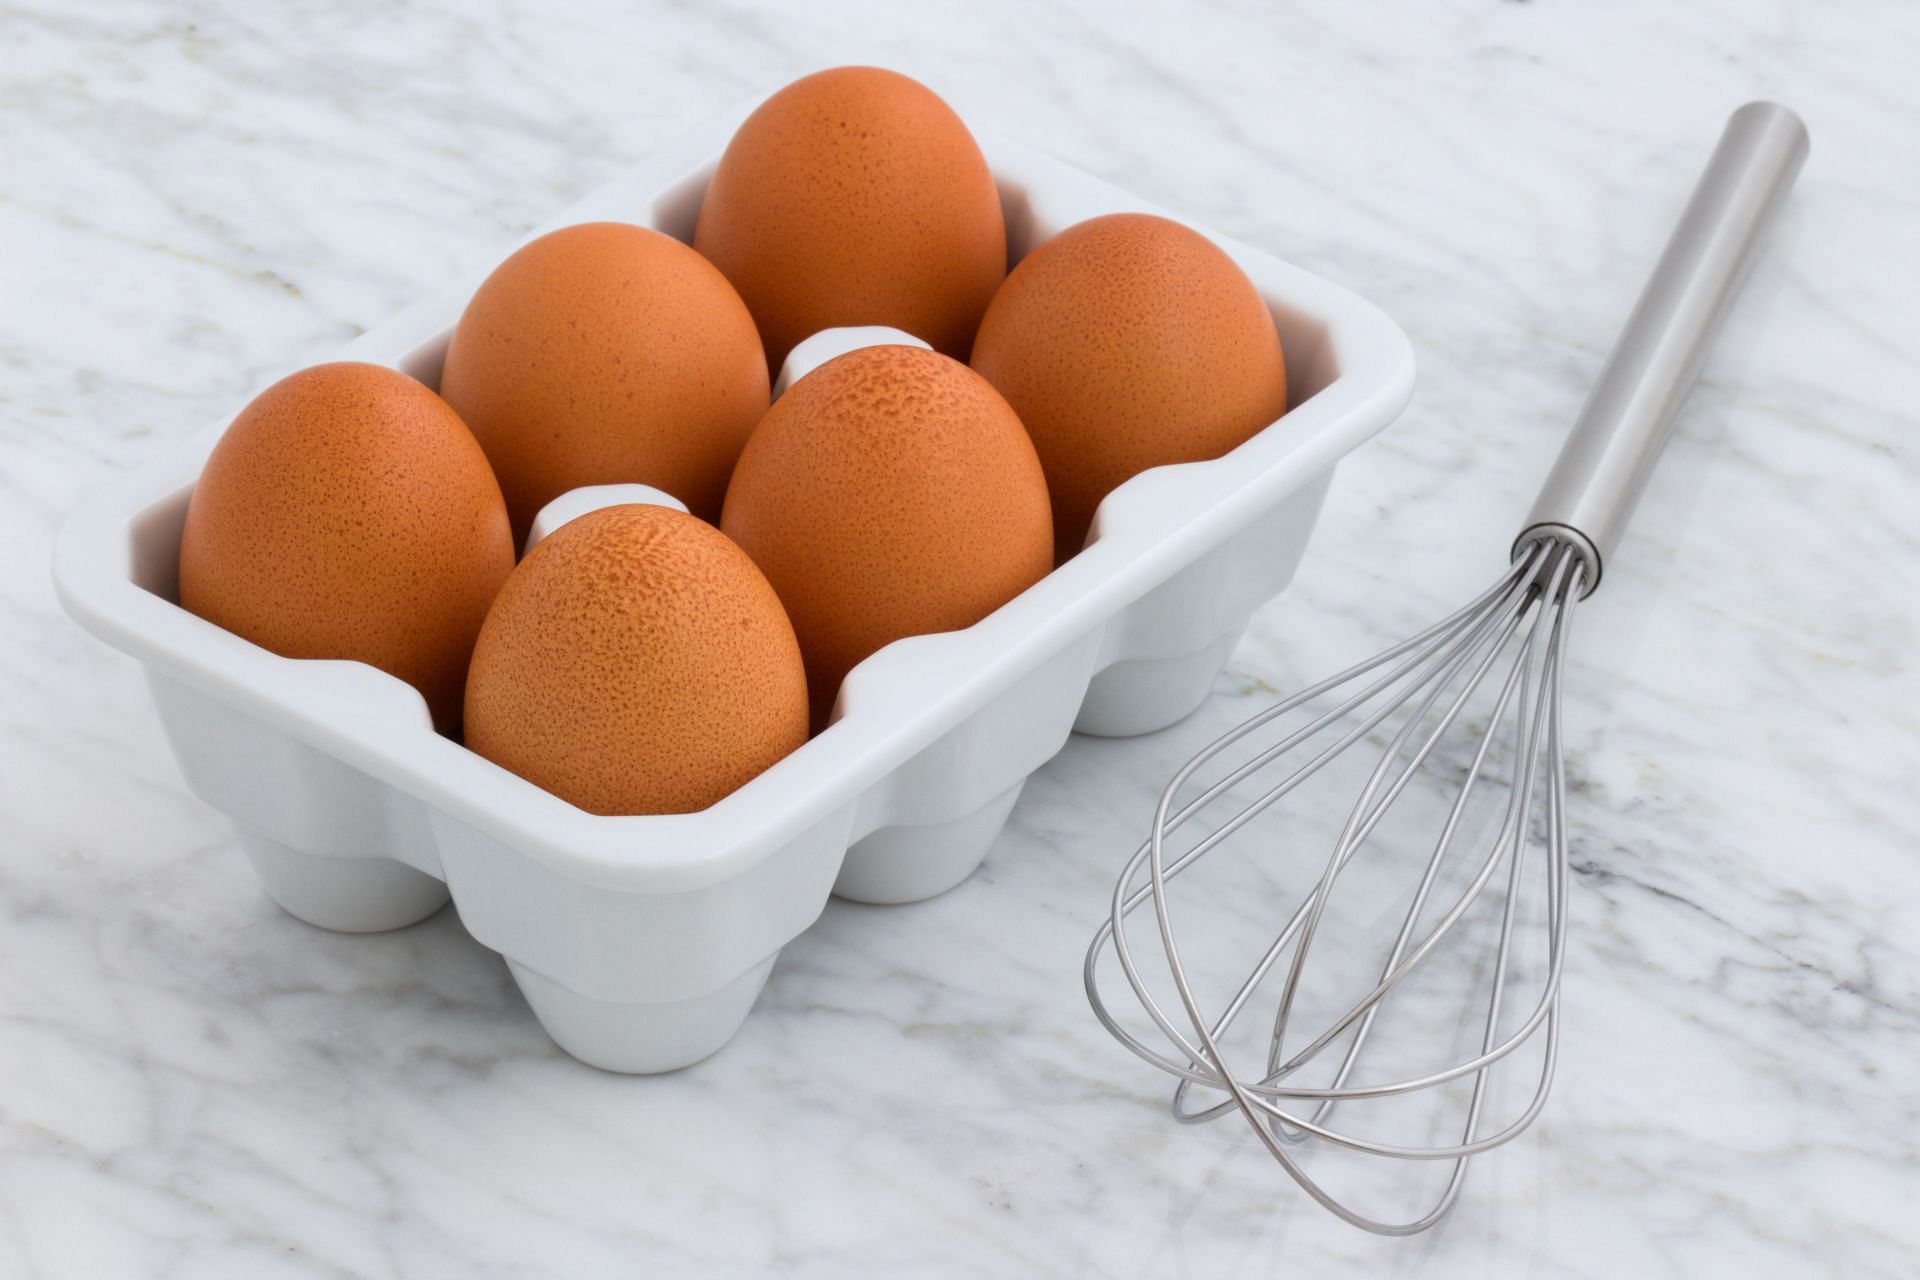 Eggs are a good source of Vitamin A (Image from Pexels @Estudio Gourmet)